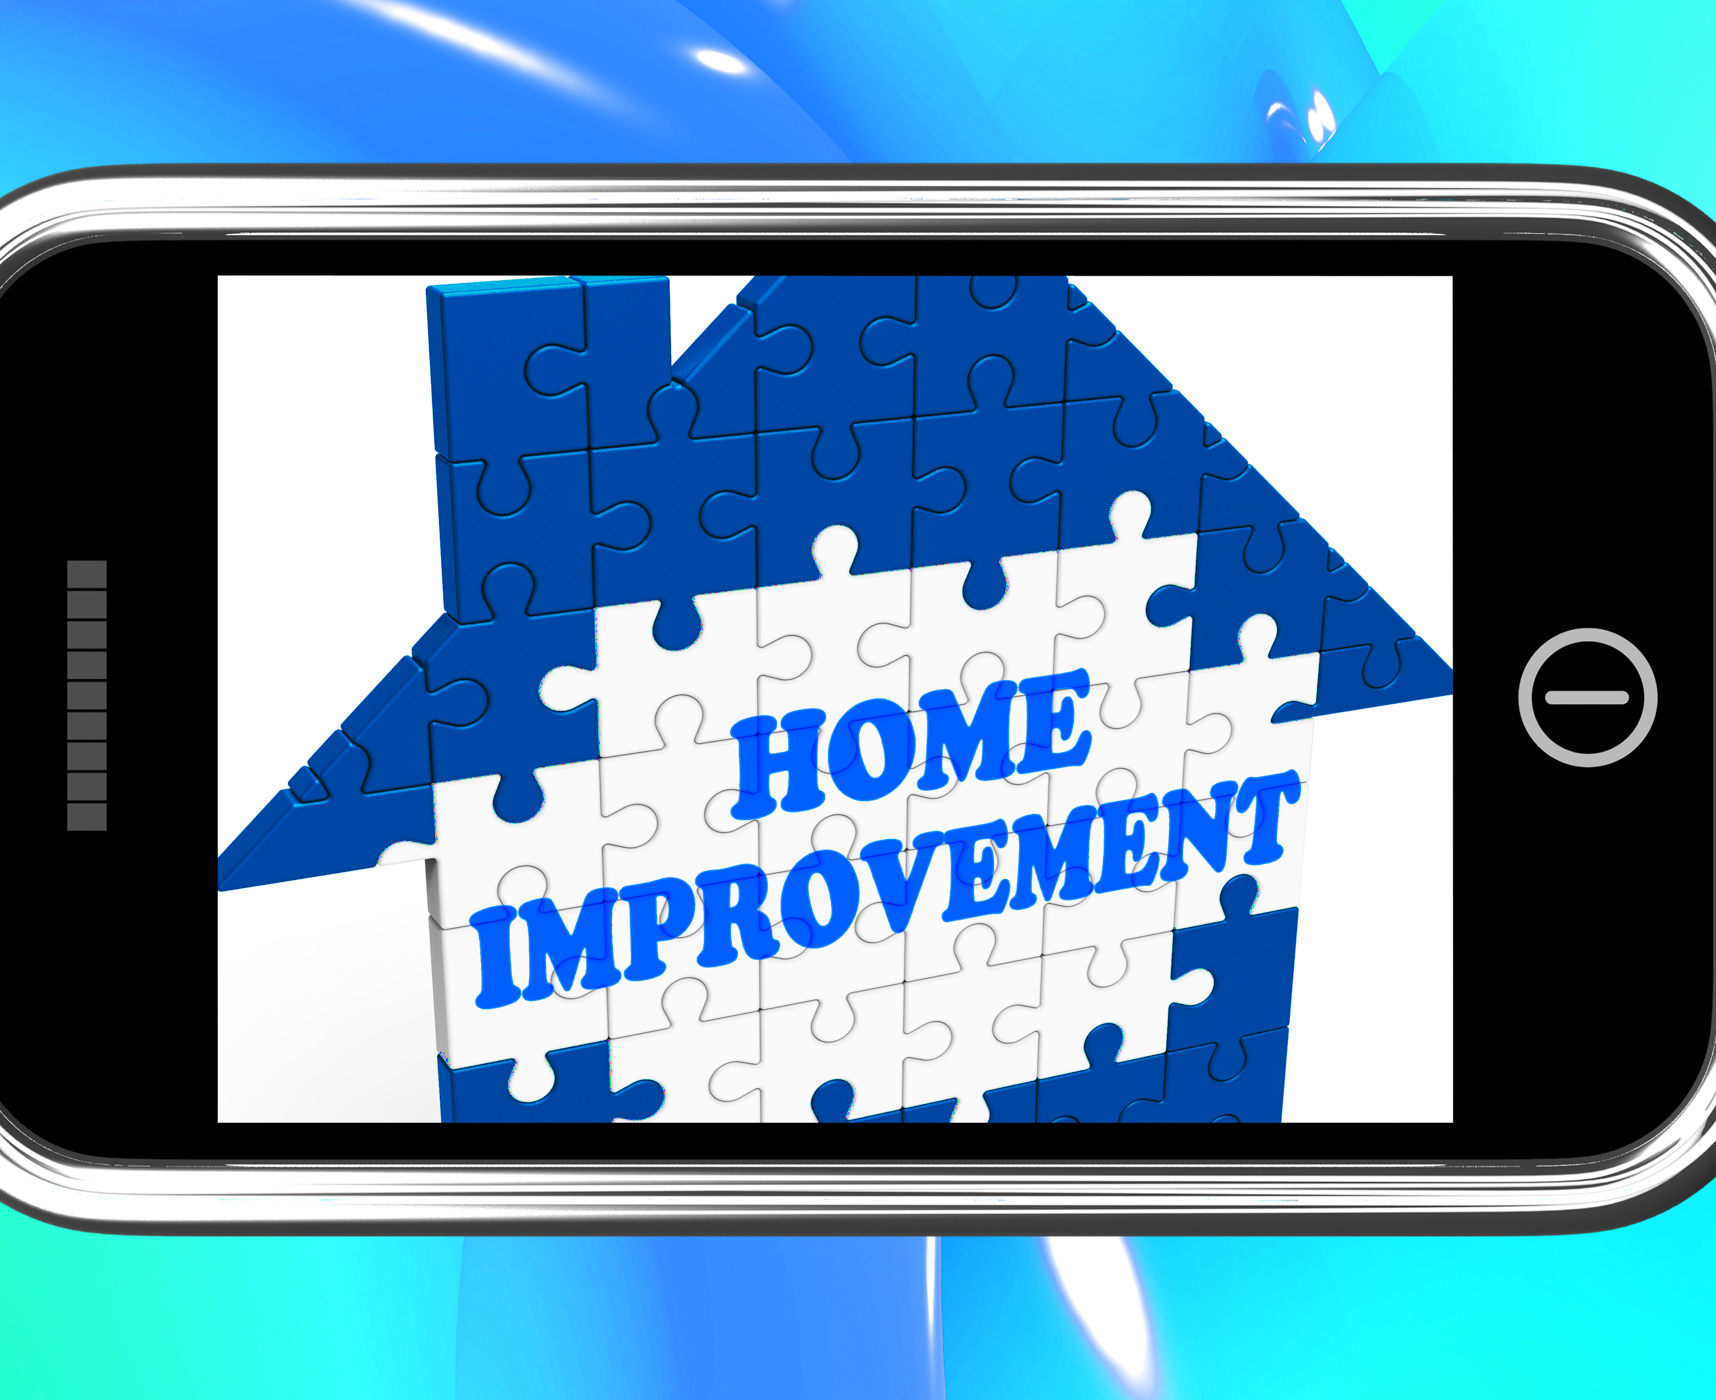 Home improvement on smartphone shows hiring contractor photo